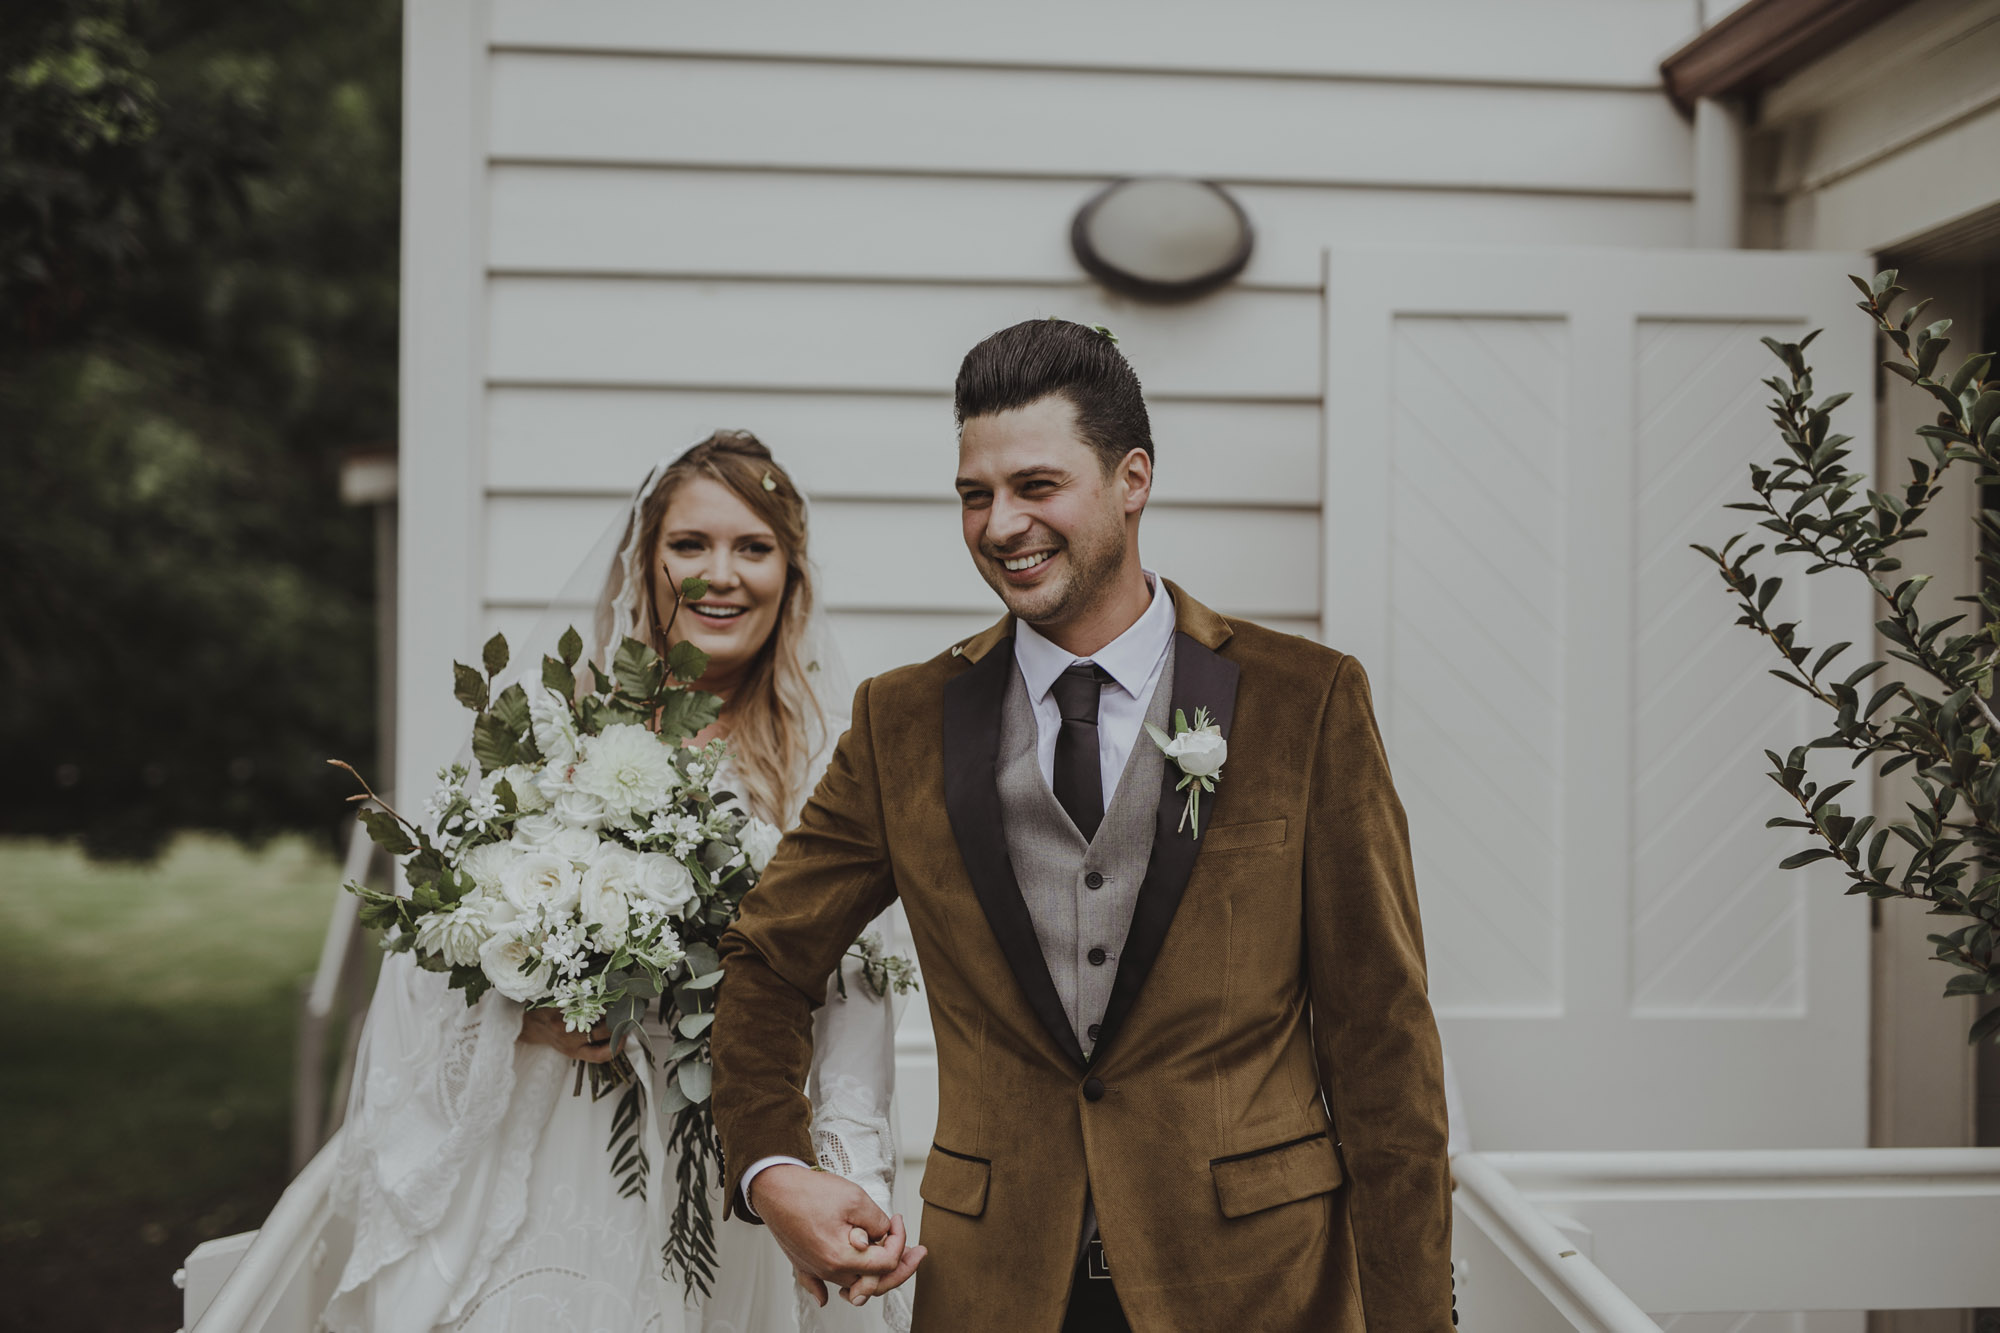 26 A low key New Zealand Estate wedding with a bohemian vintage vibe